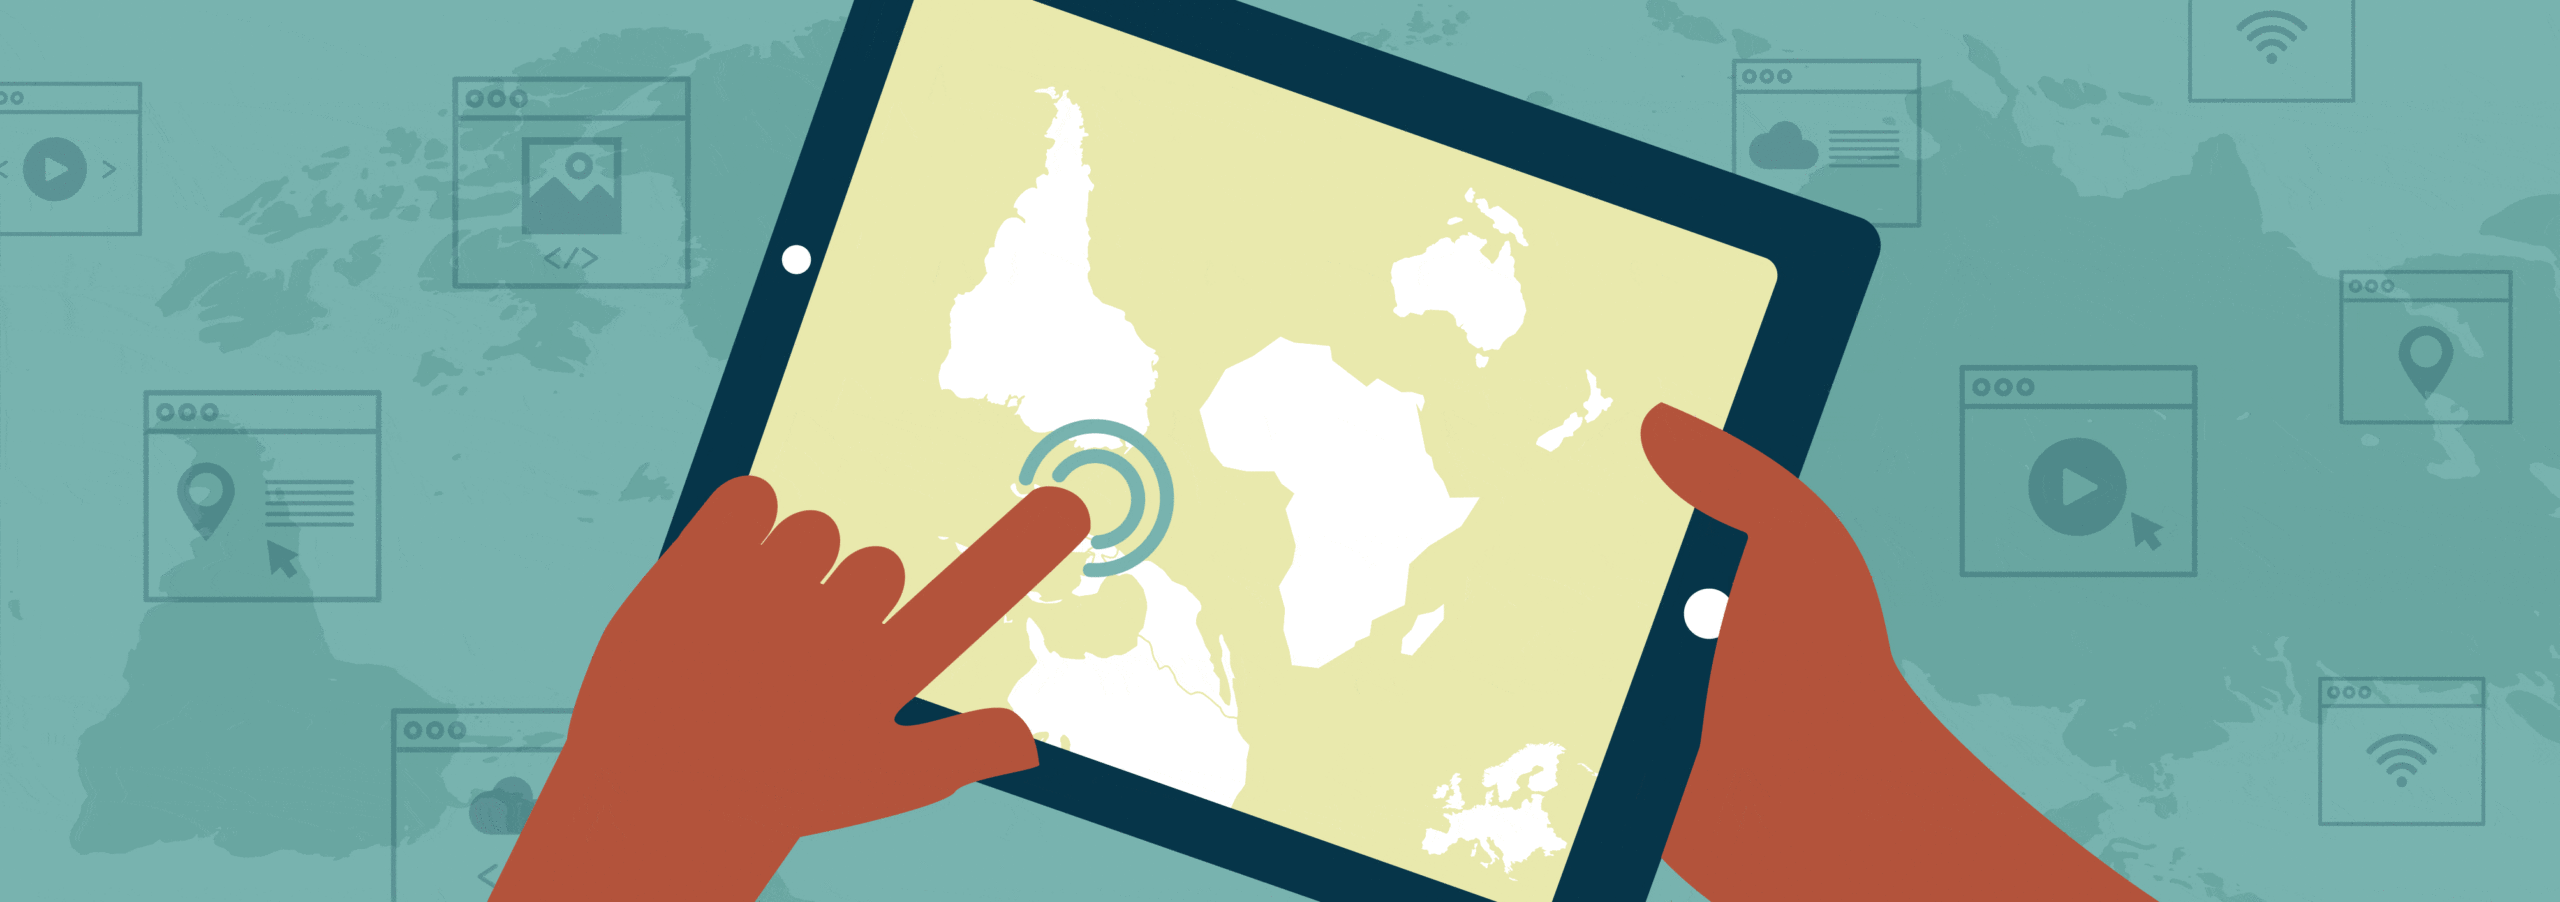 Illustration of hands touching a tablet with a non-Eurocentric map onscreen